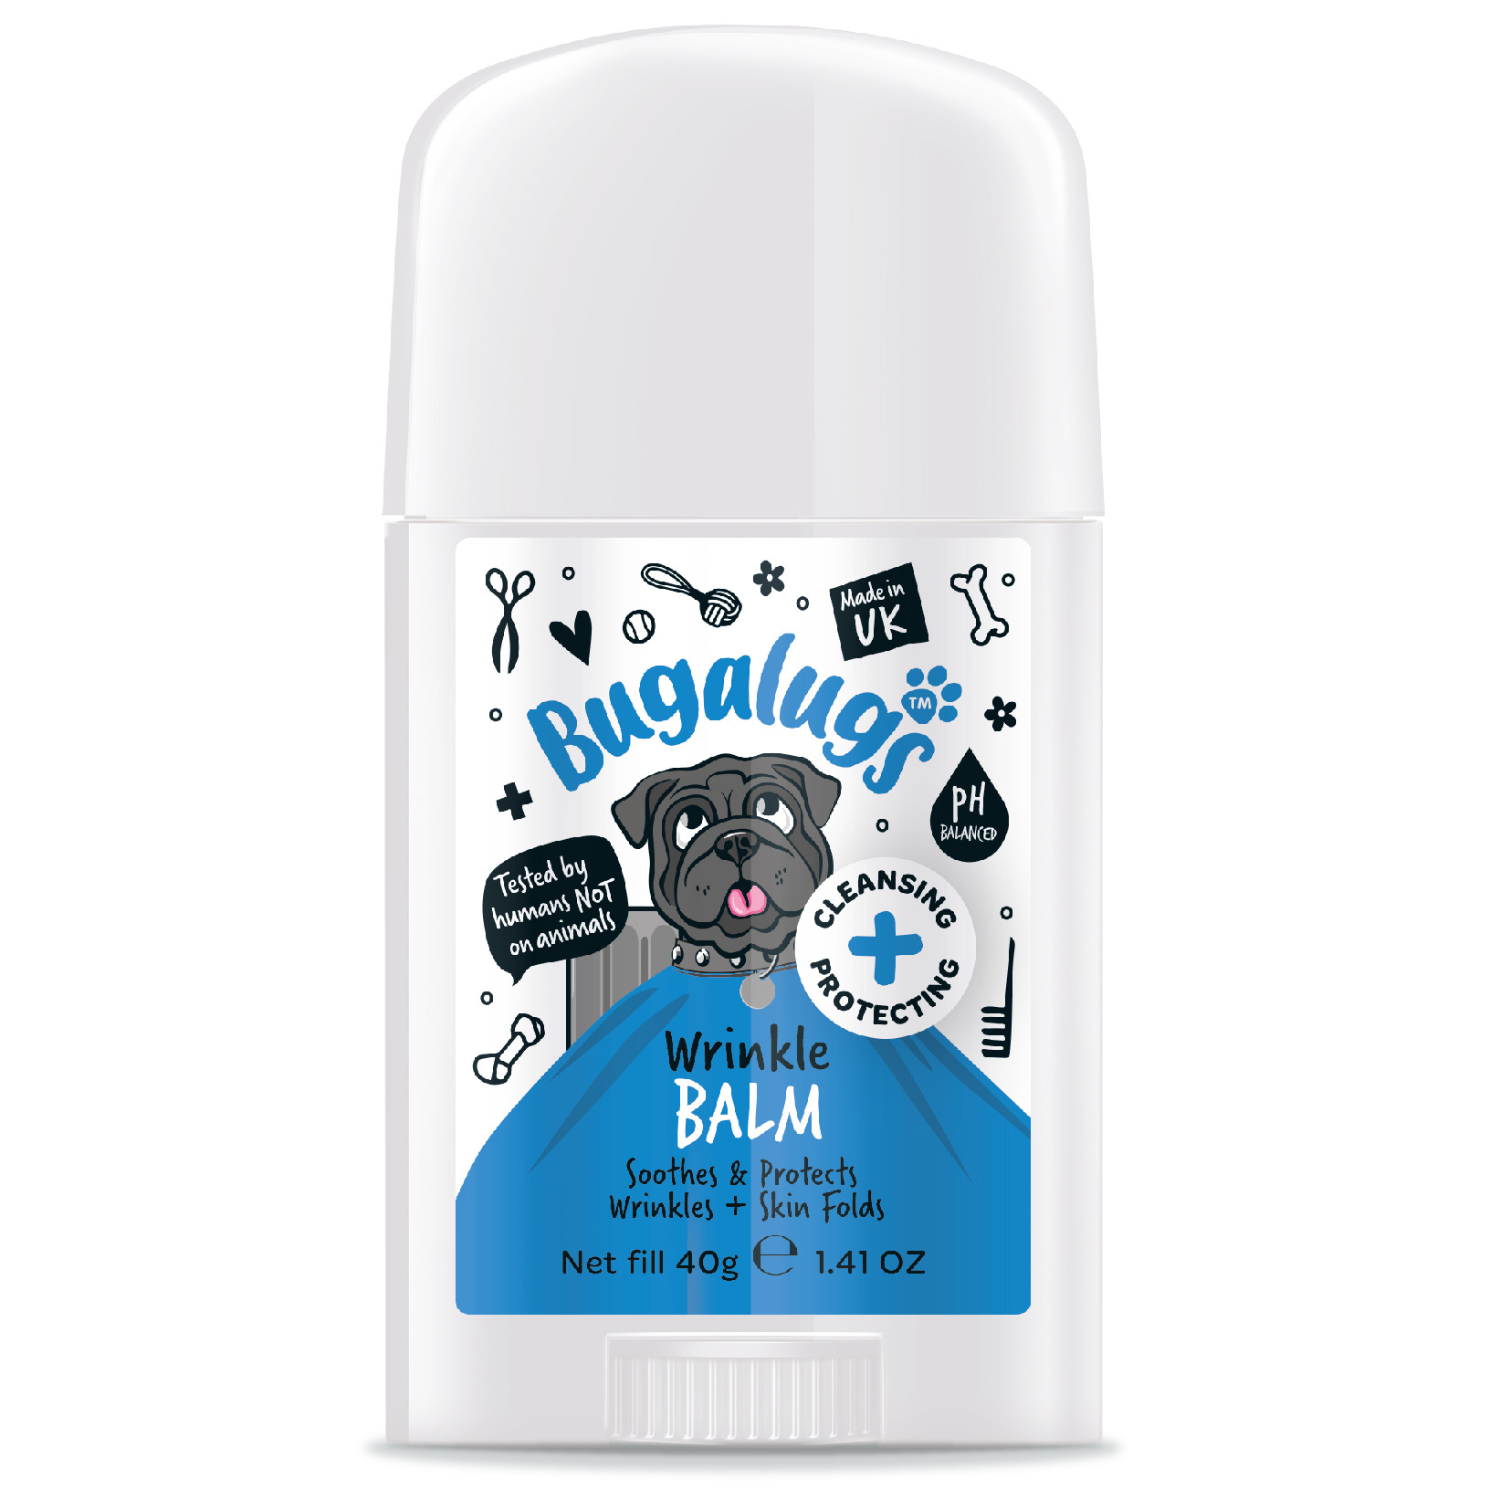 Bugalugs Wrinkle Balm - Soothes and Protects Wrinkles and Skin Folds - For dogs and cats